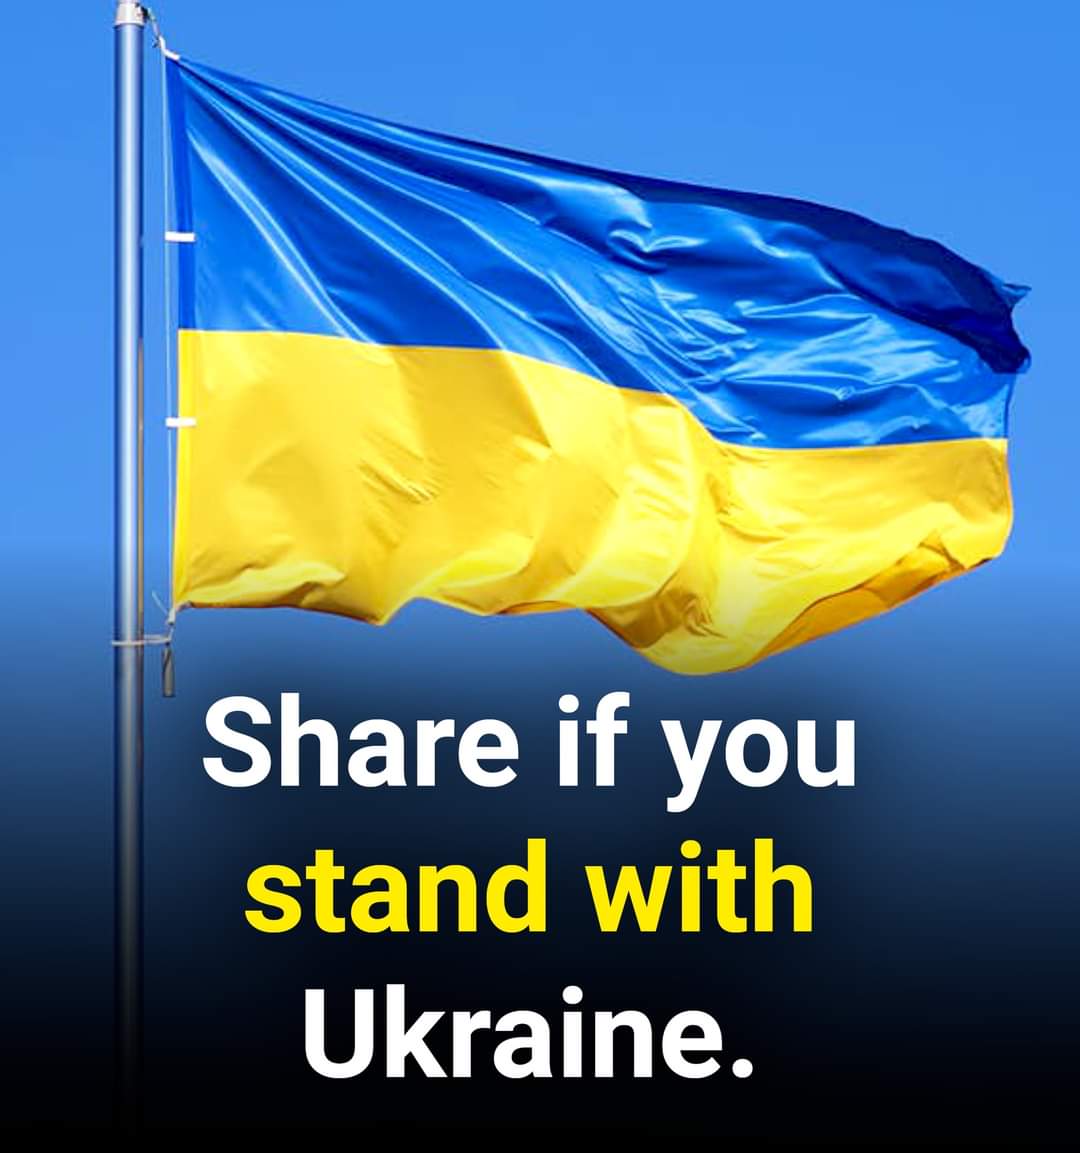 @IndepenentMr Nope, and I've tweeted this with the Ukraine 🇺🇦 many times